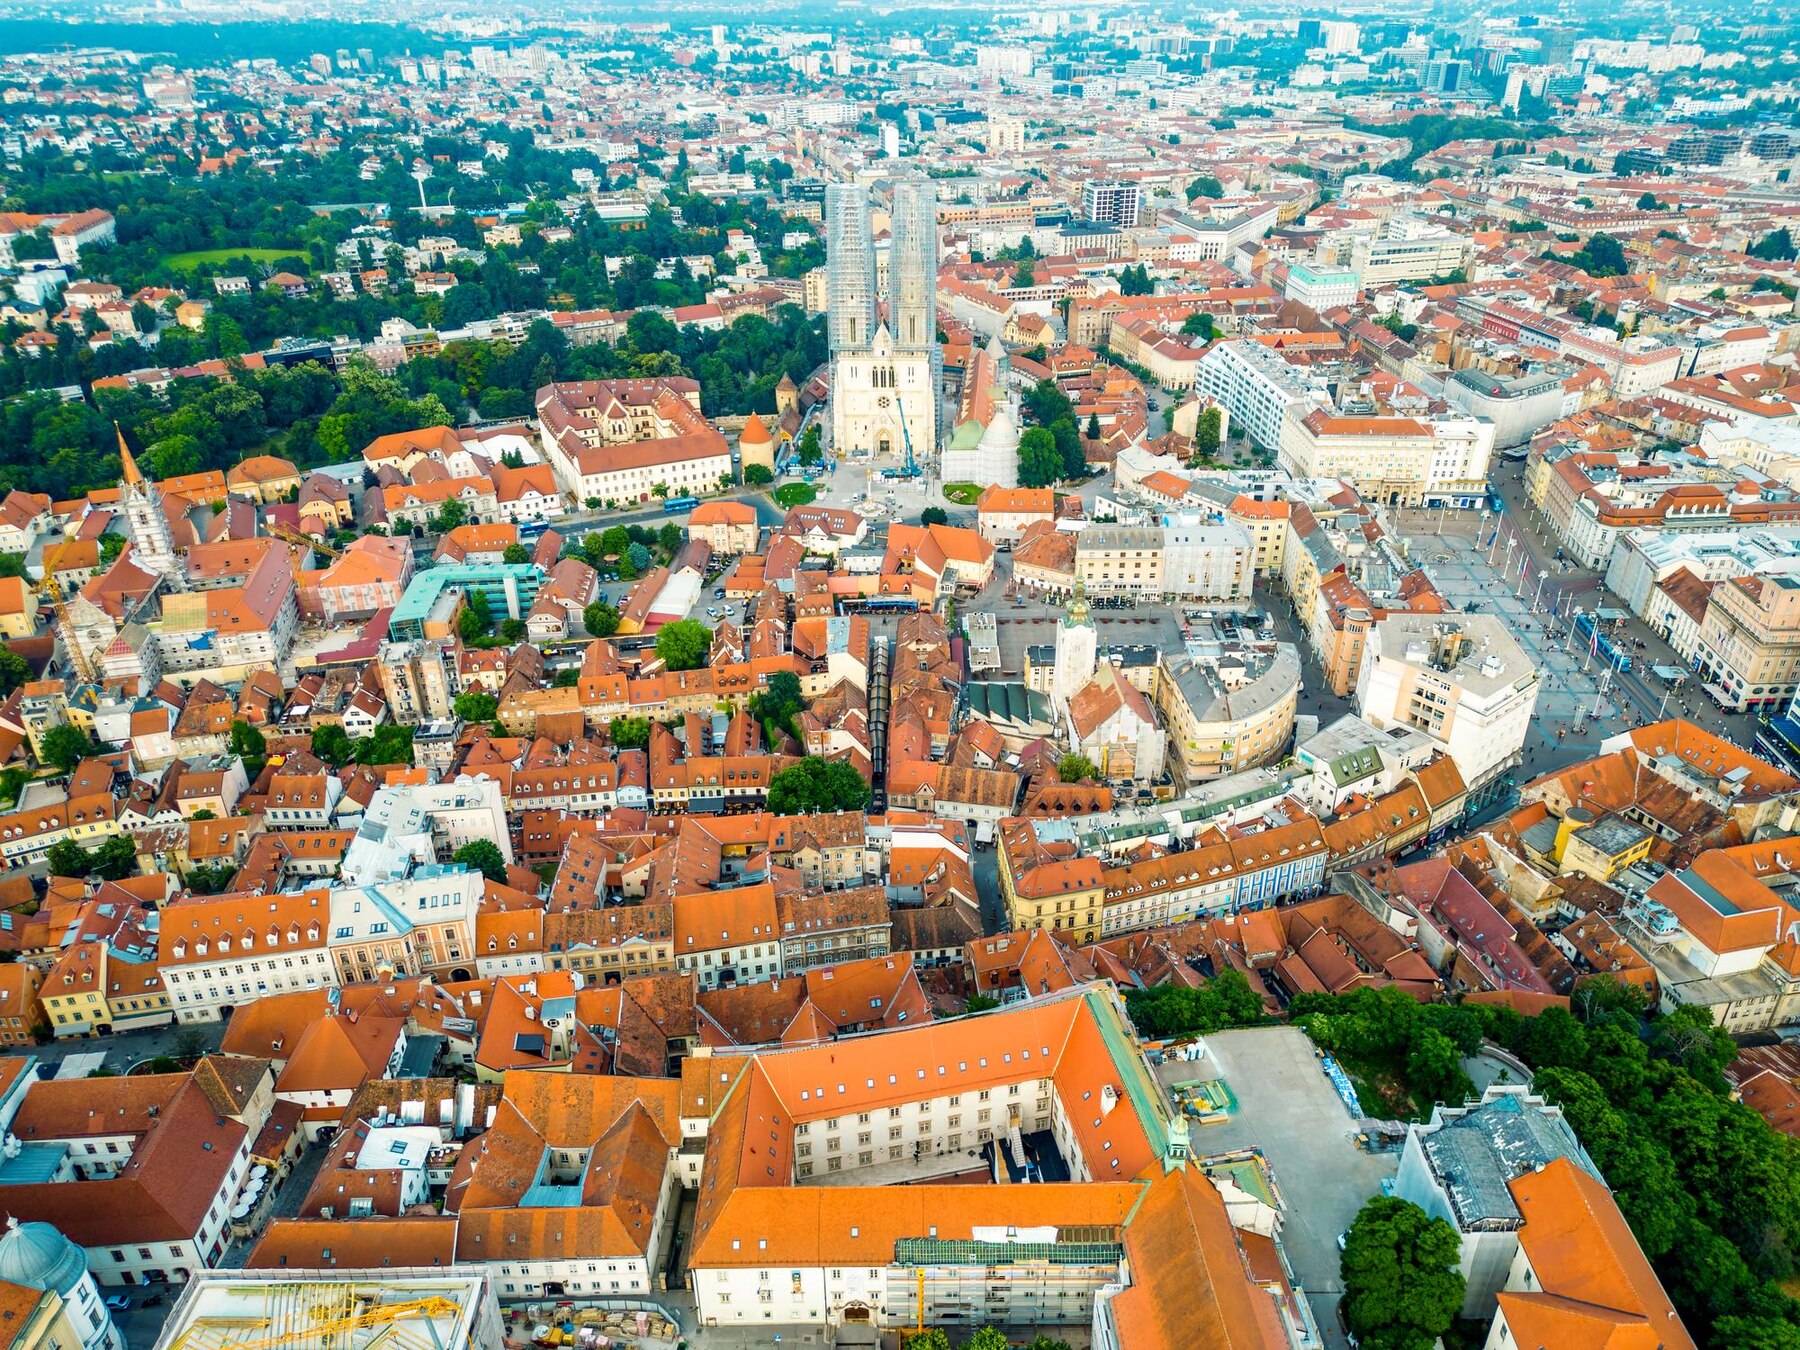 zagreb-croatia-historical-city-centre-with-multiple-old-buildings